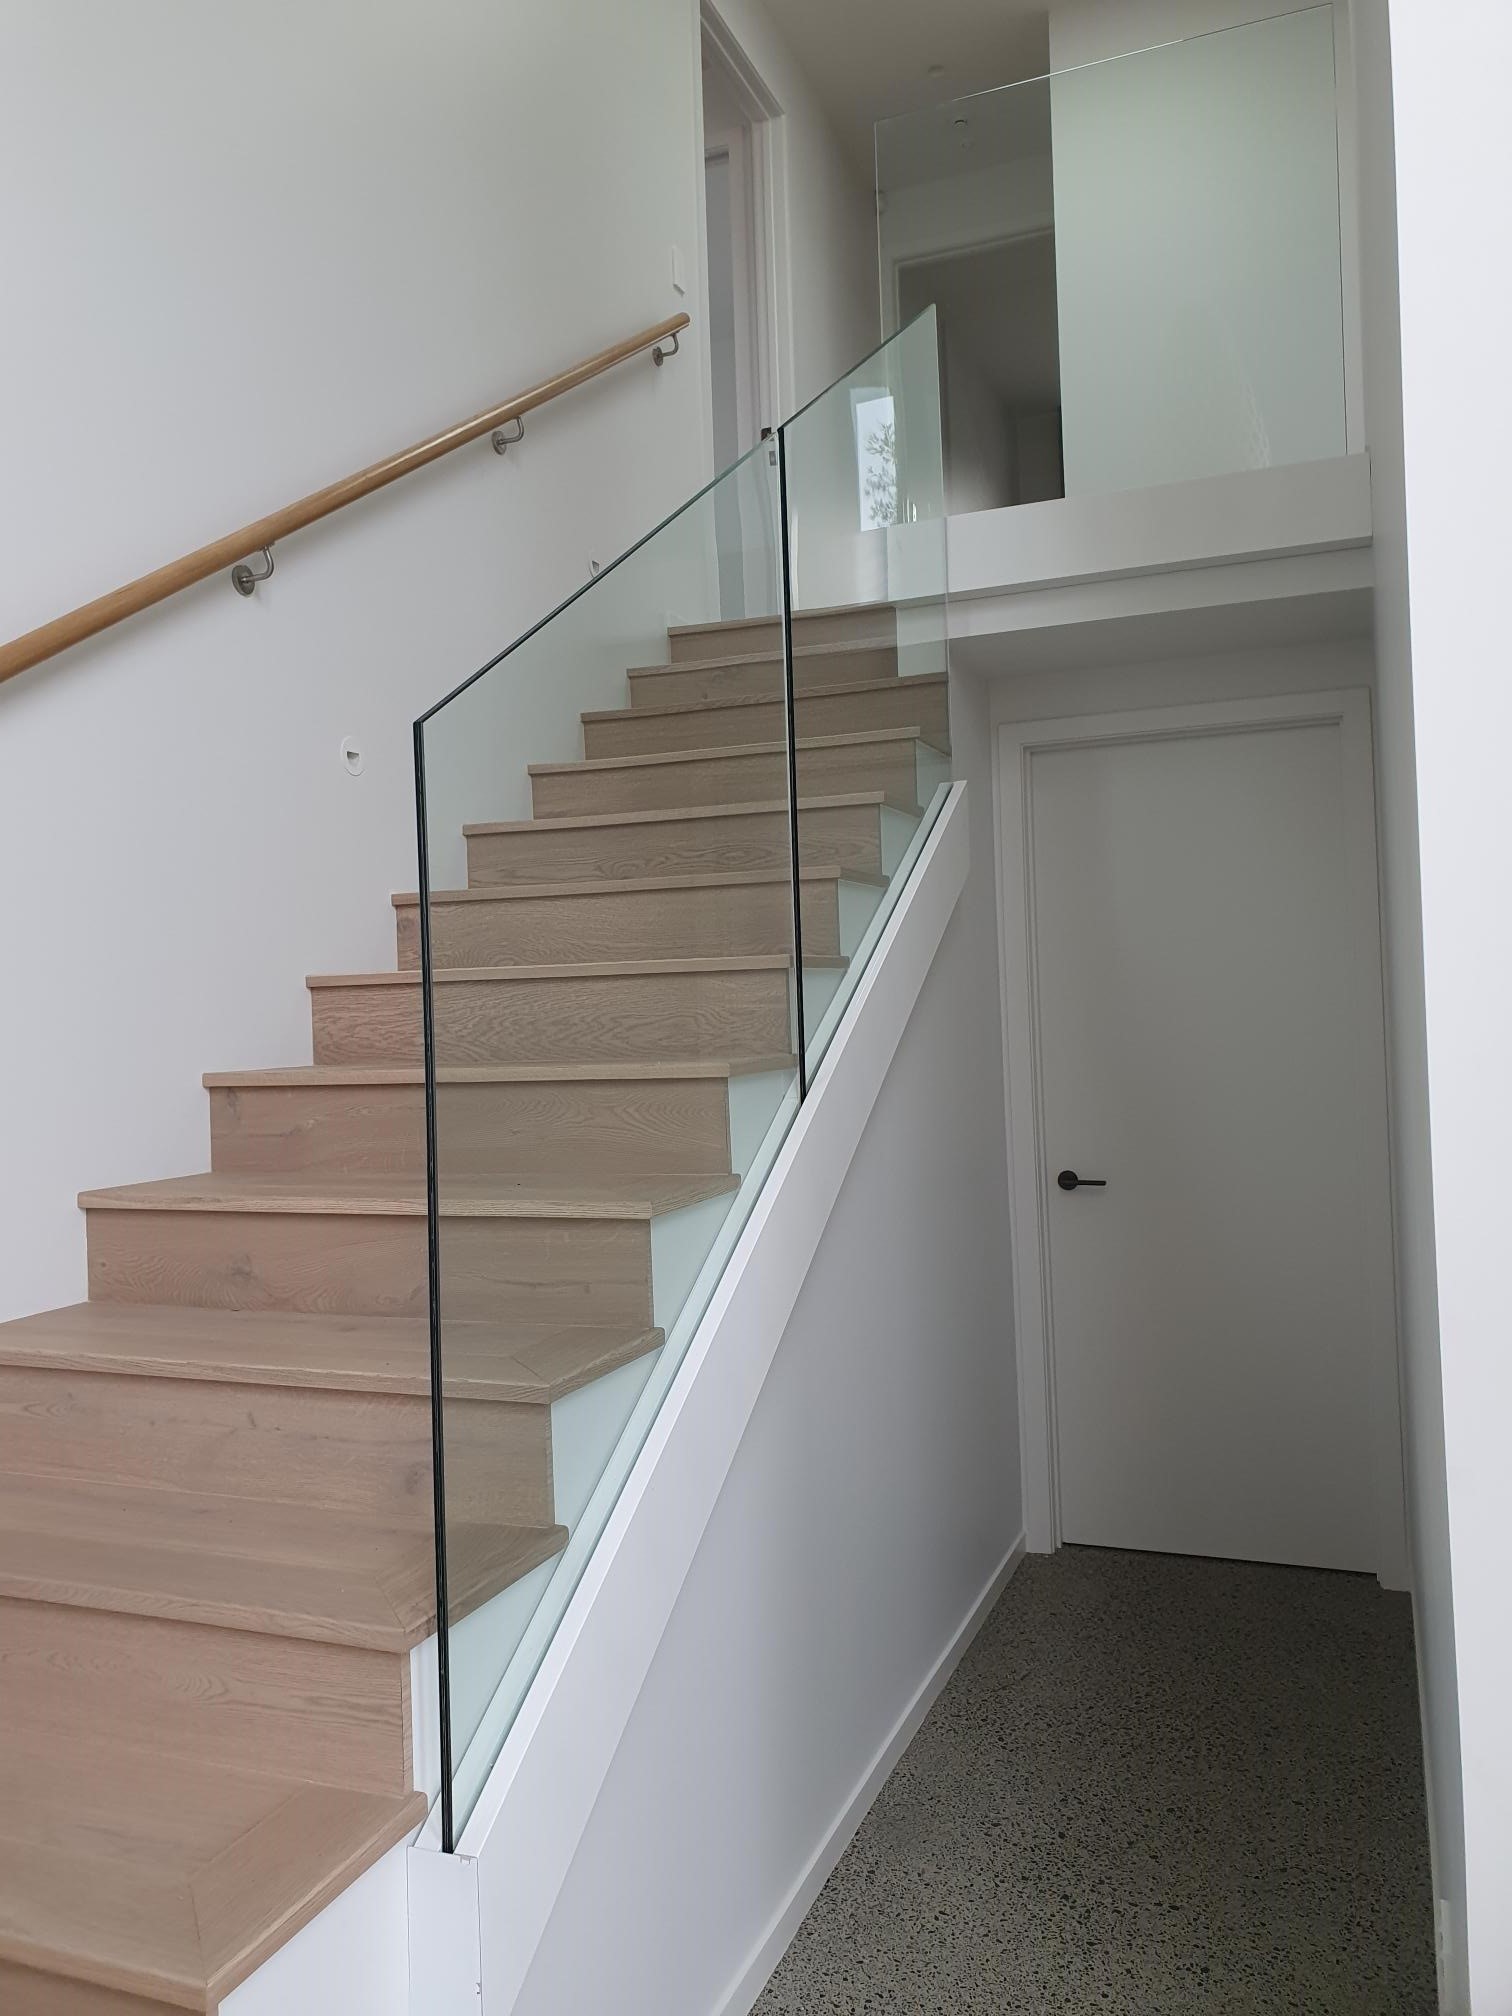 Clearline Stairs - Appliance White